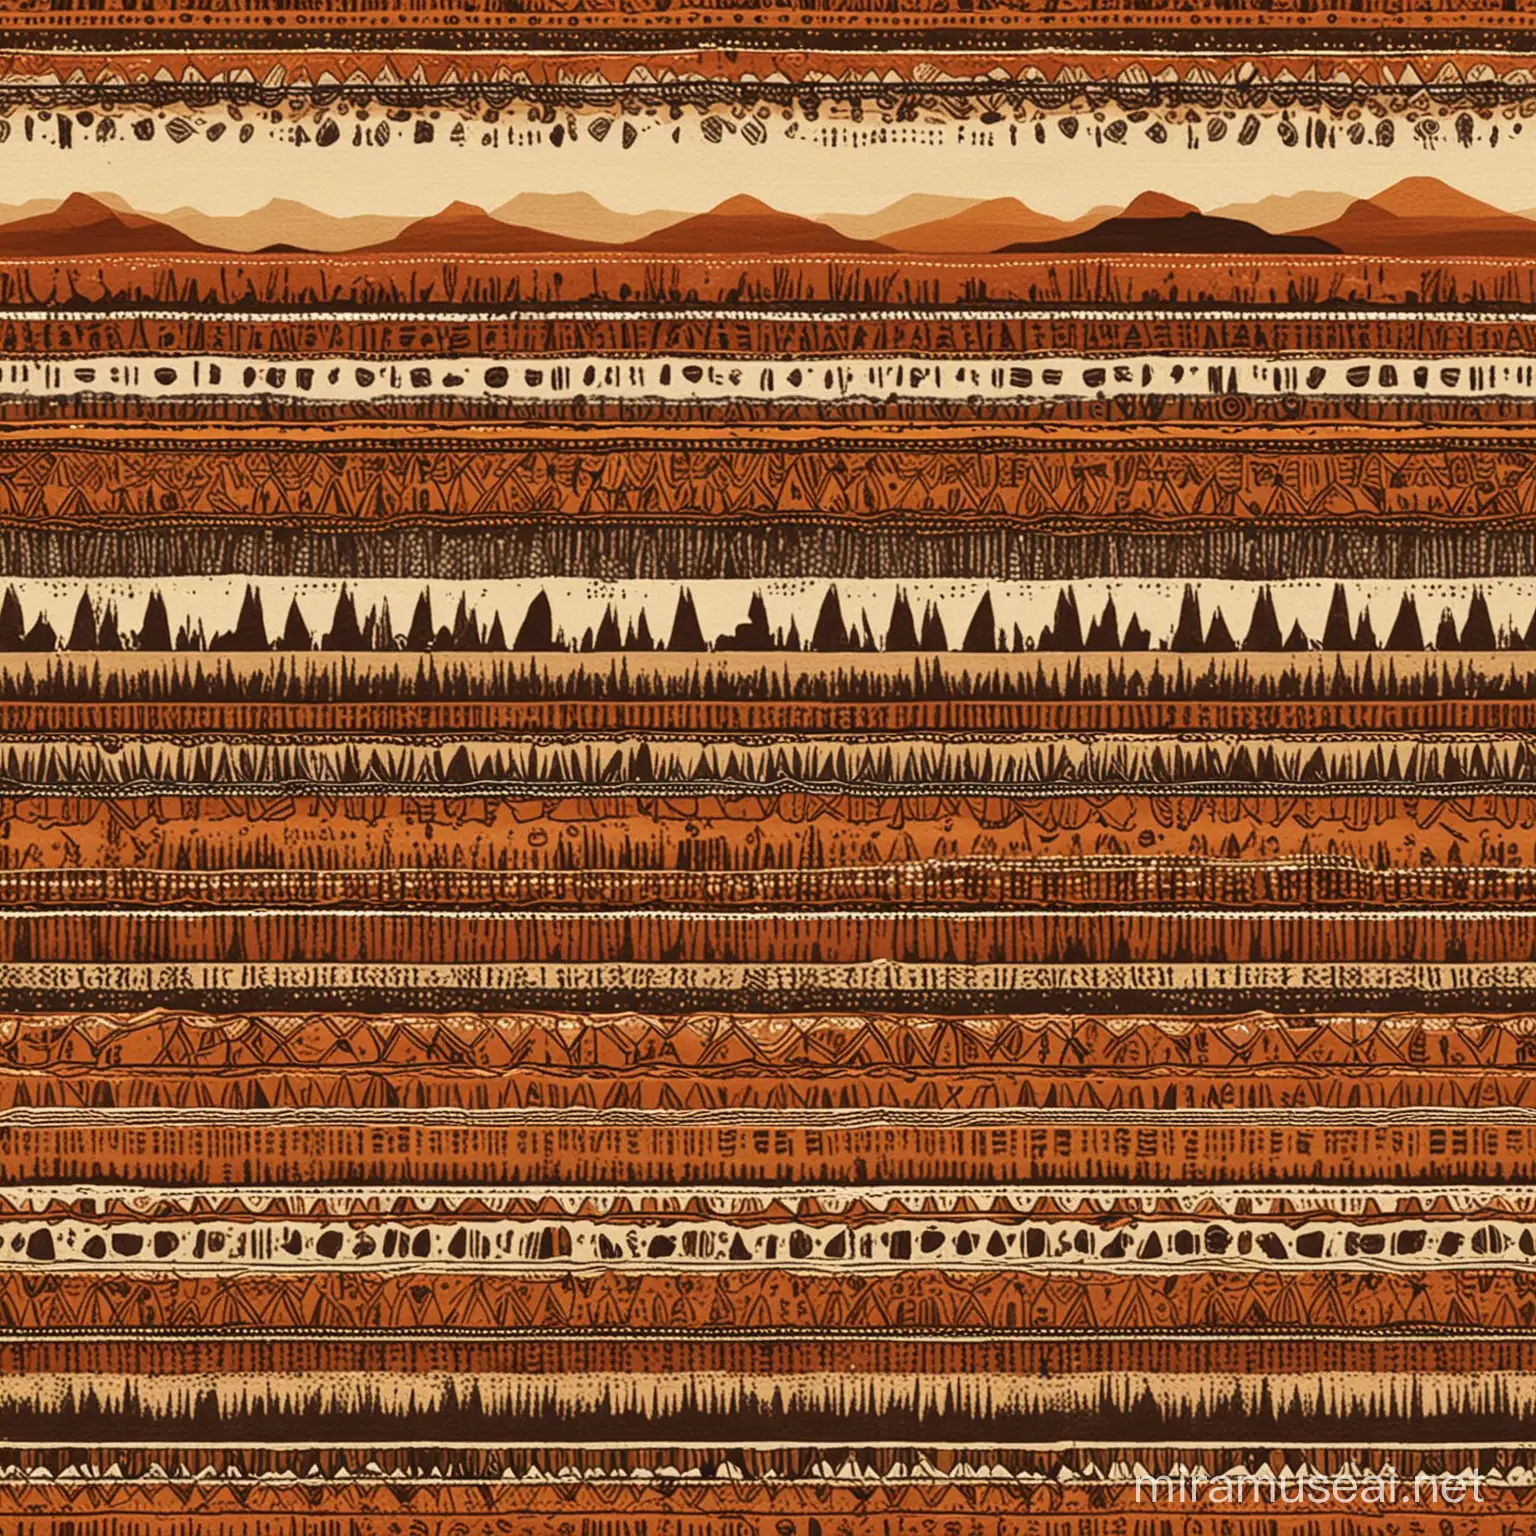 African Tribal Texture with Views of the Desert Landscape